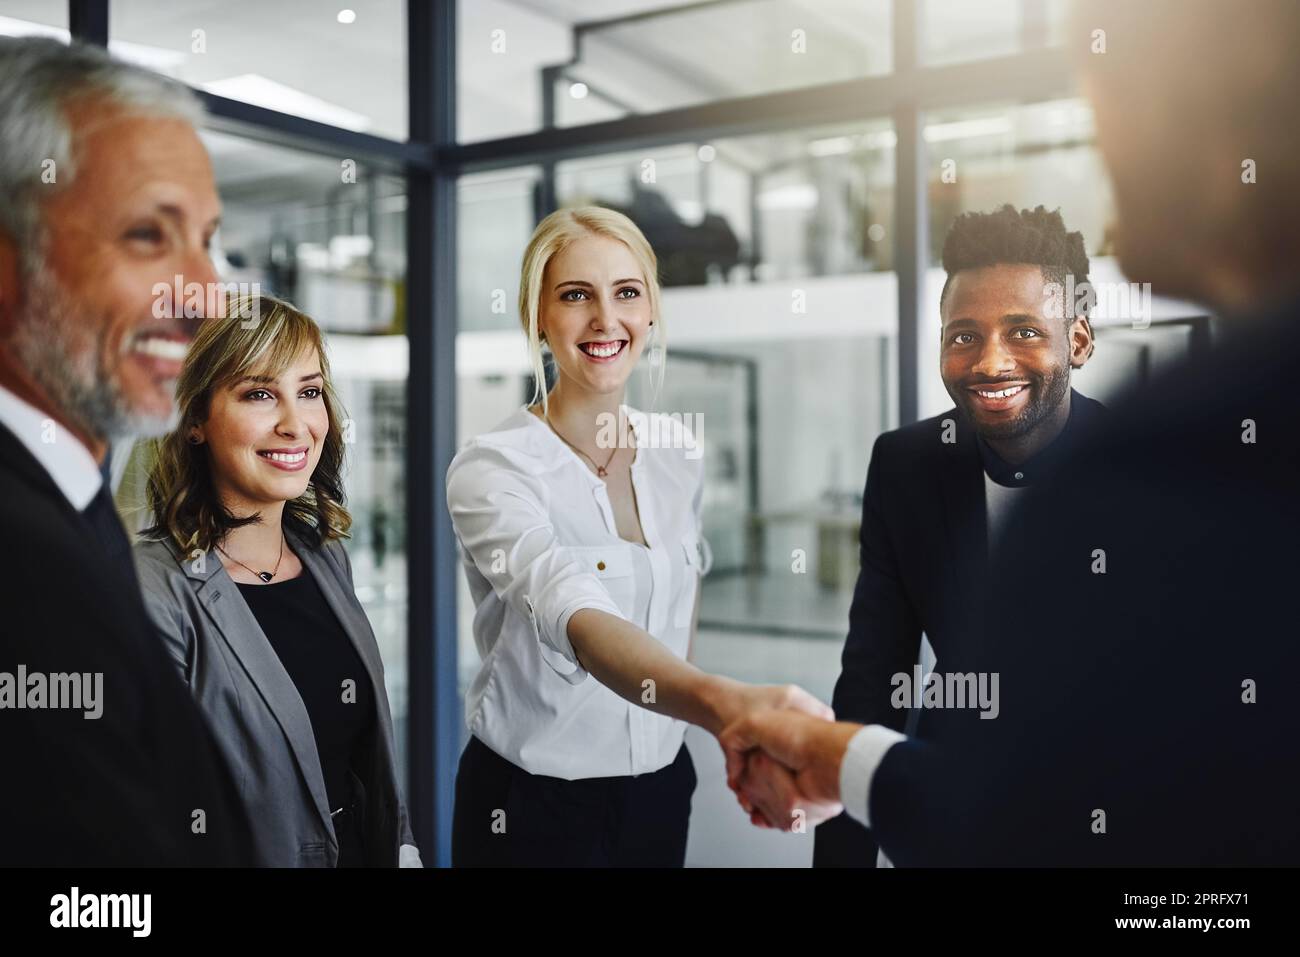 Well no doubt work very well together. businesspeople shaking hands in an office. Stock Photo